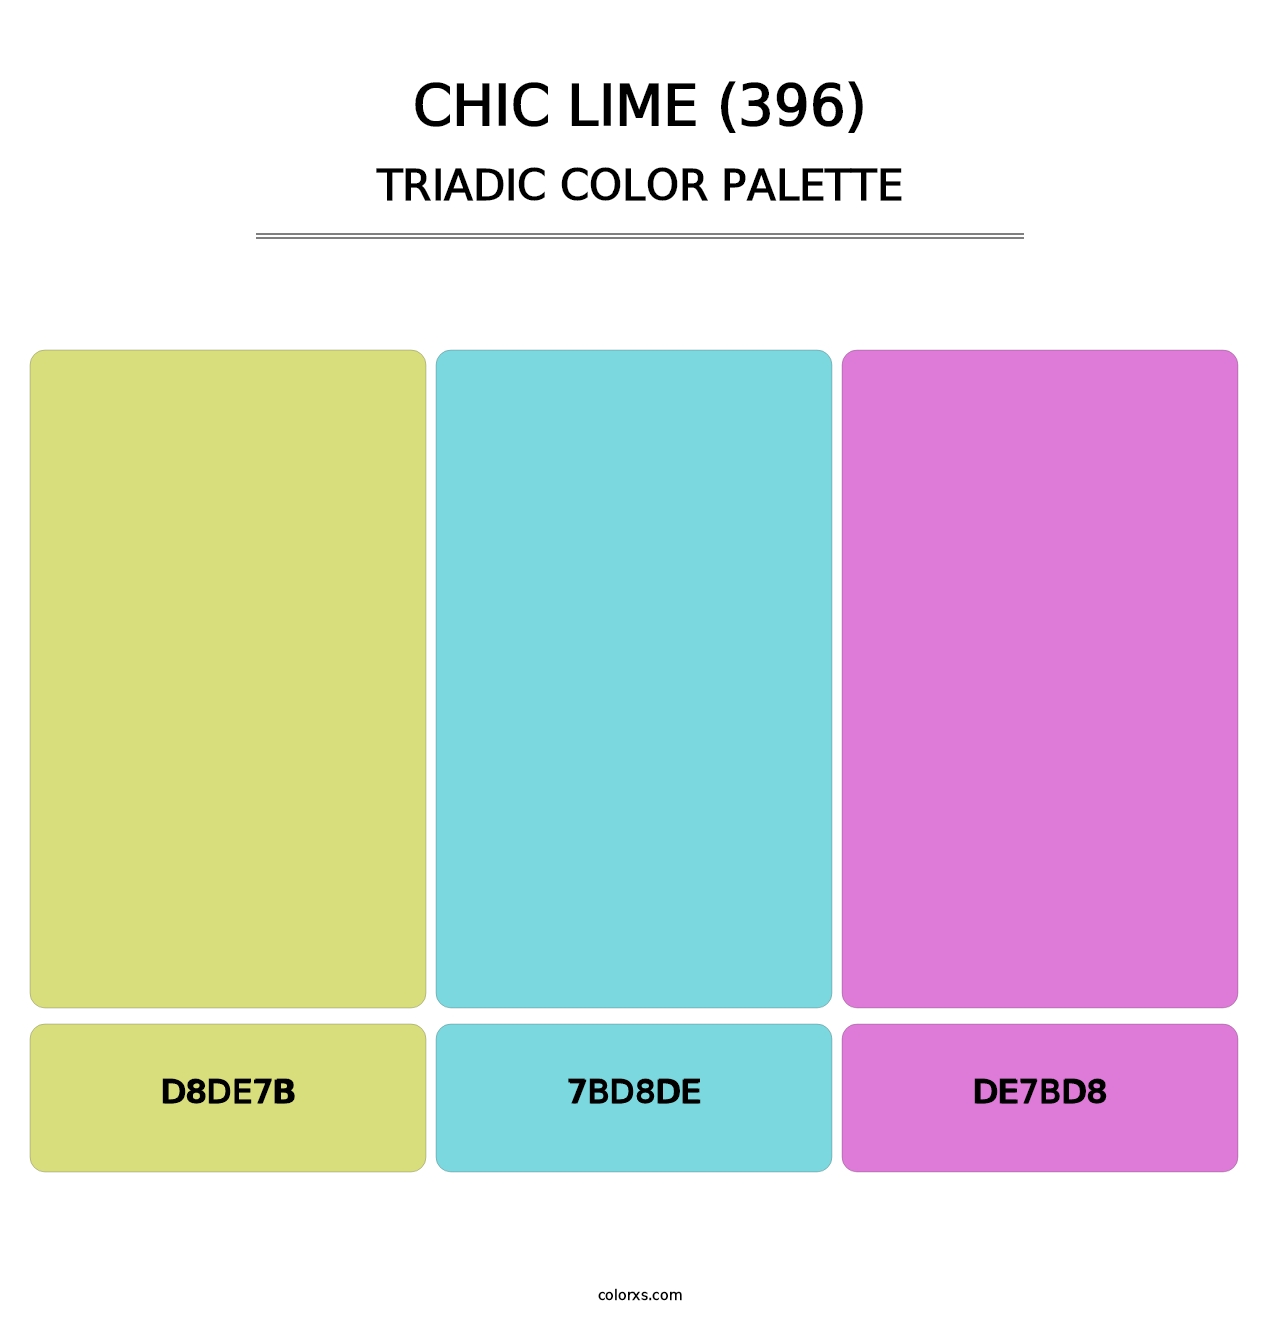 Chic Lime (396) - Triadic Color Palette